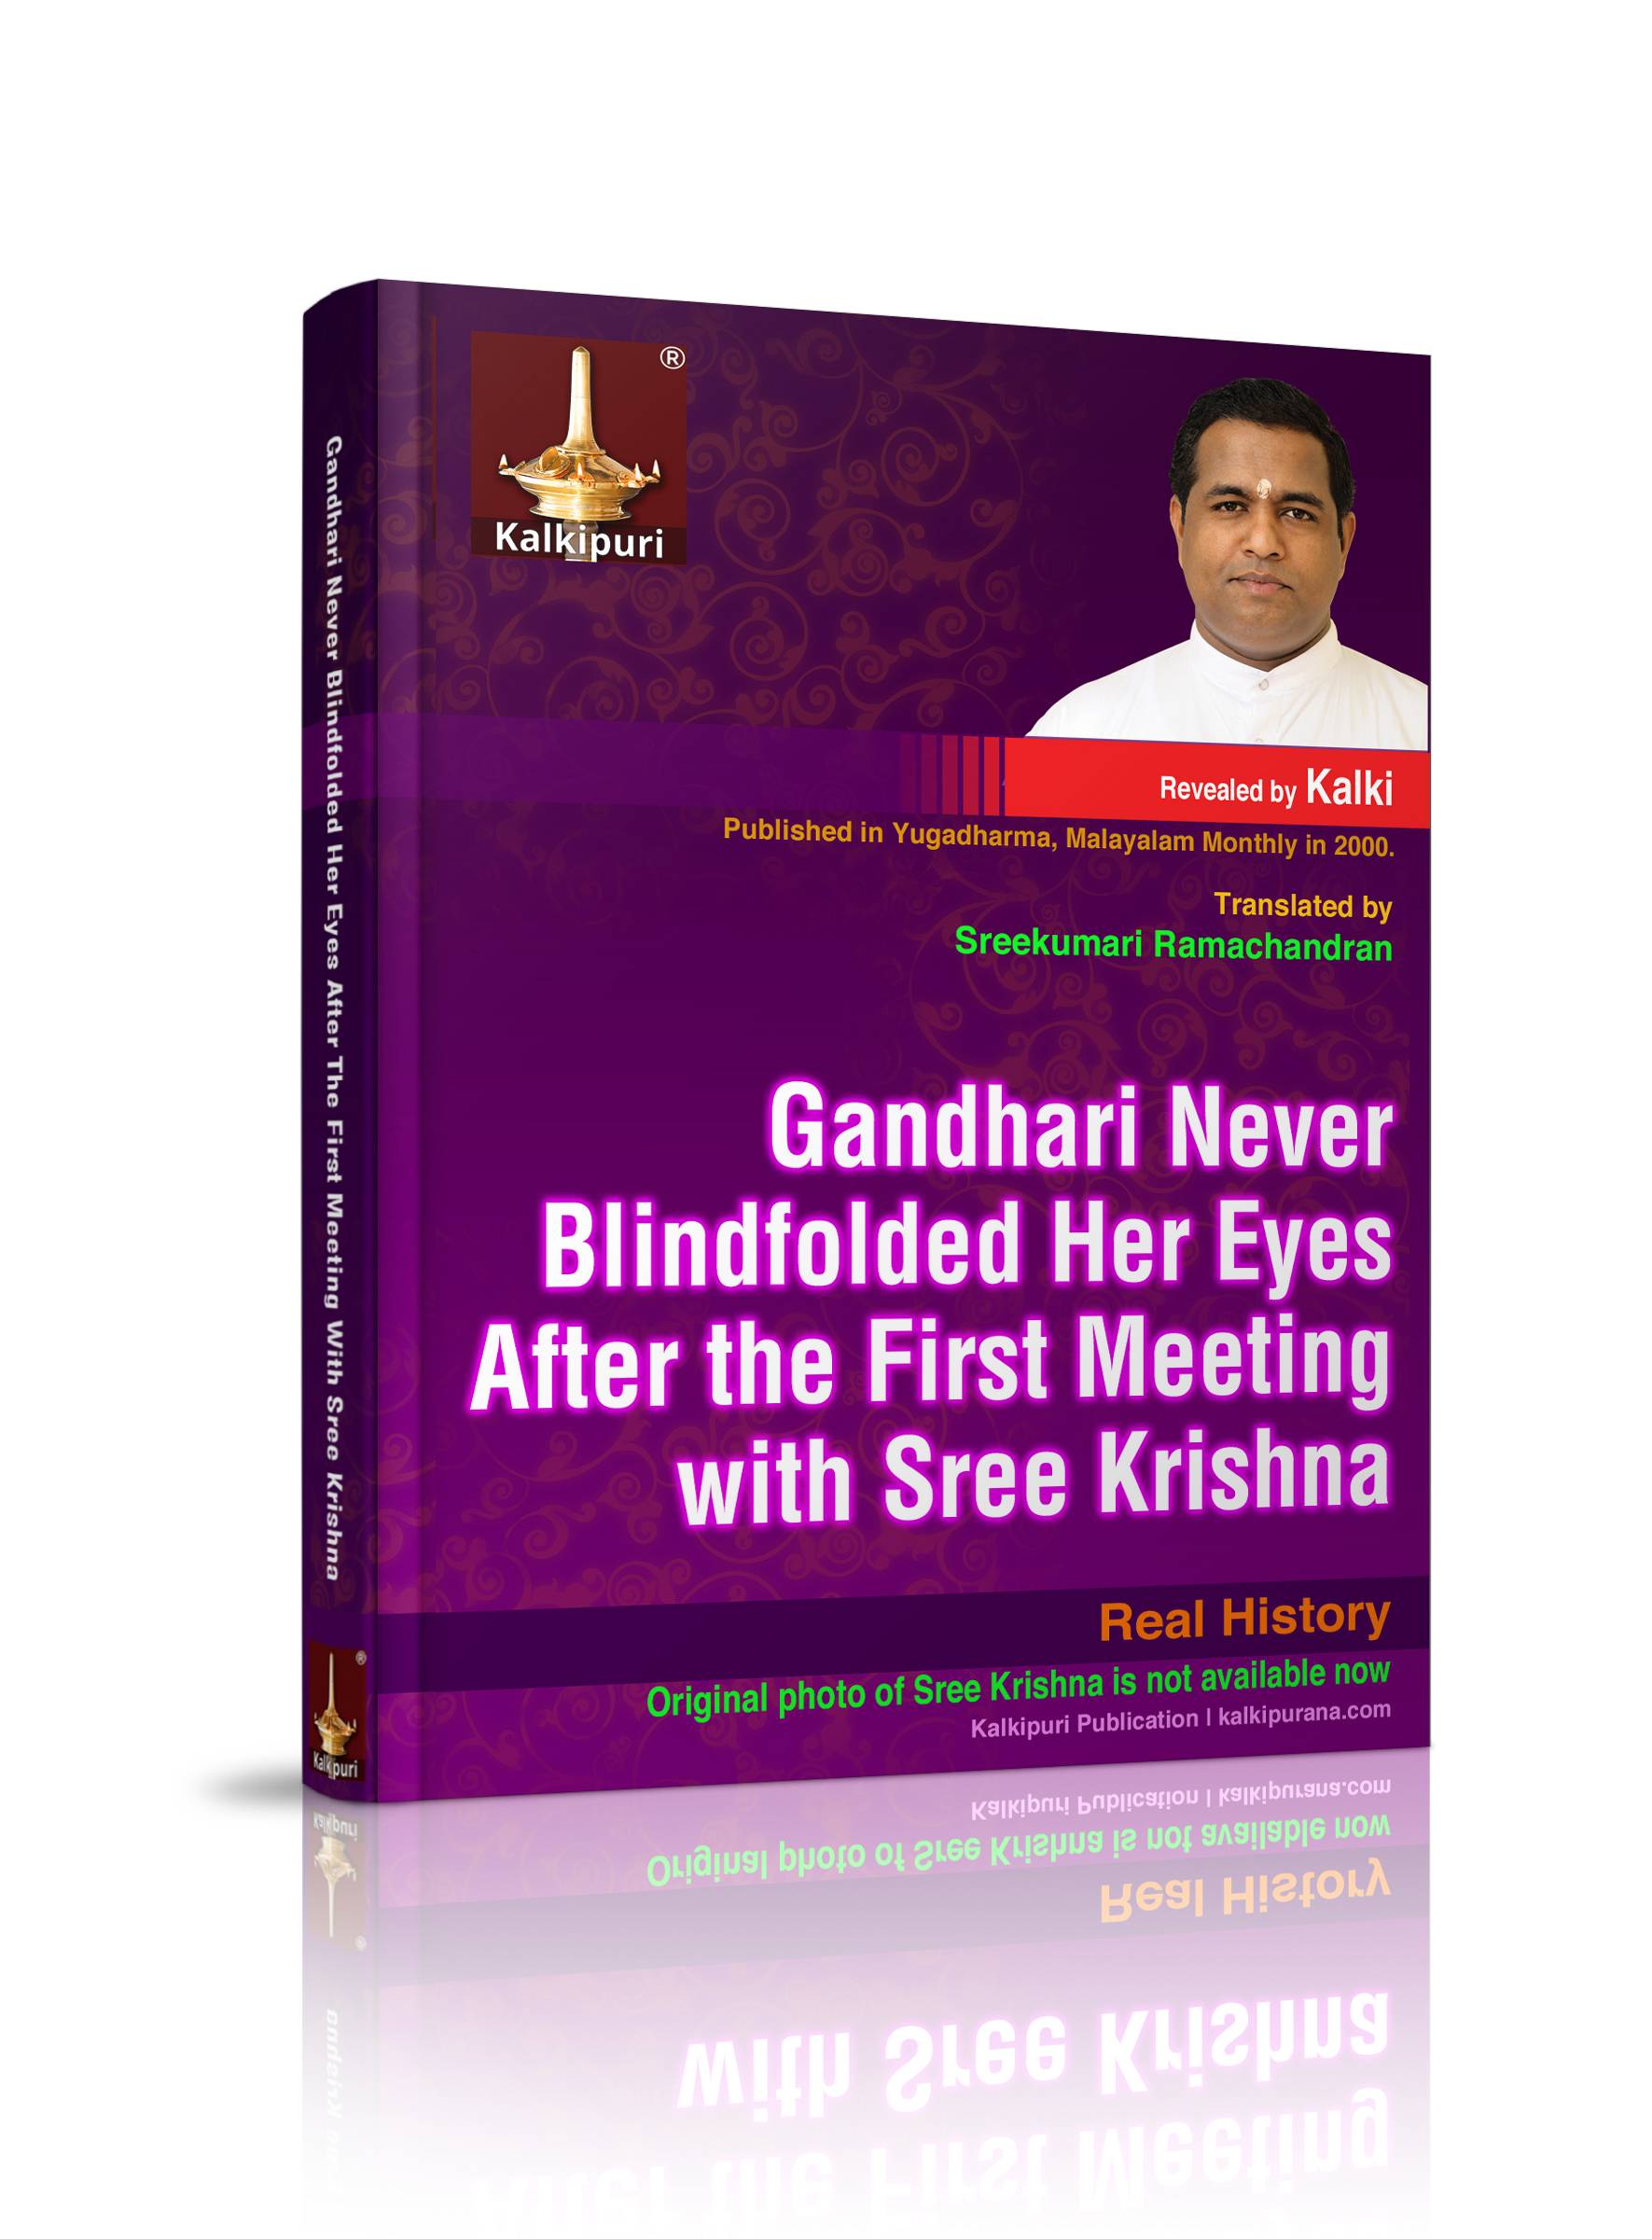 Gandhari Never Blindfolded Her Eyes After the First Meeting with Sree Krishna. Book Cover.